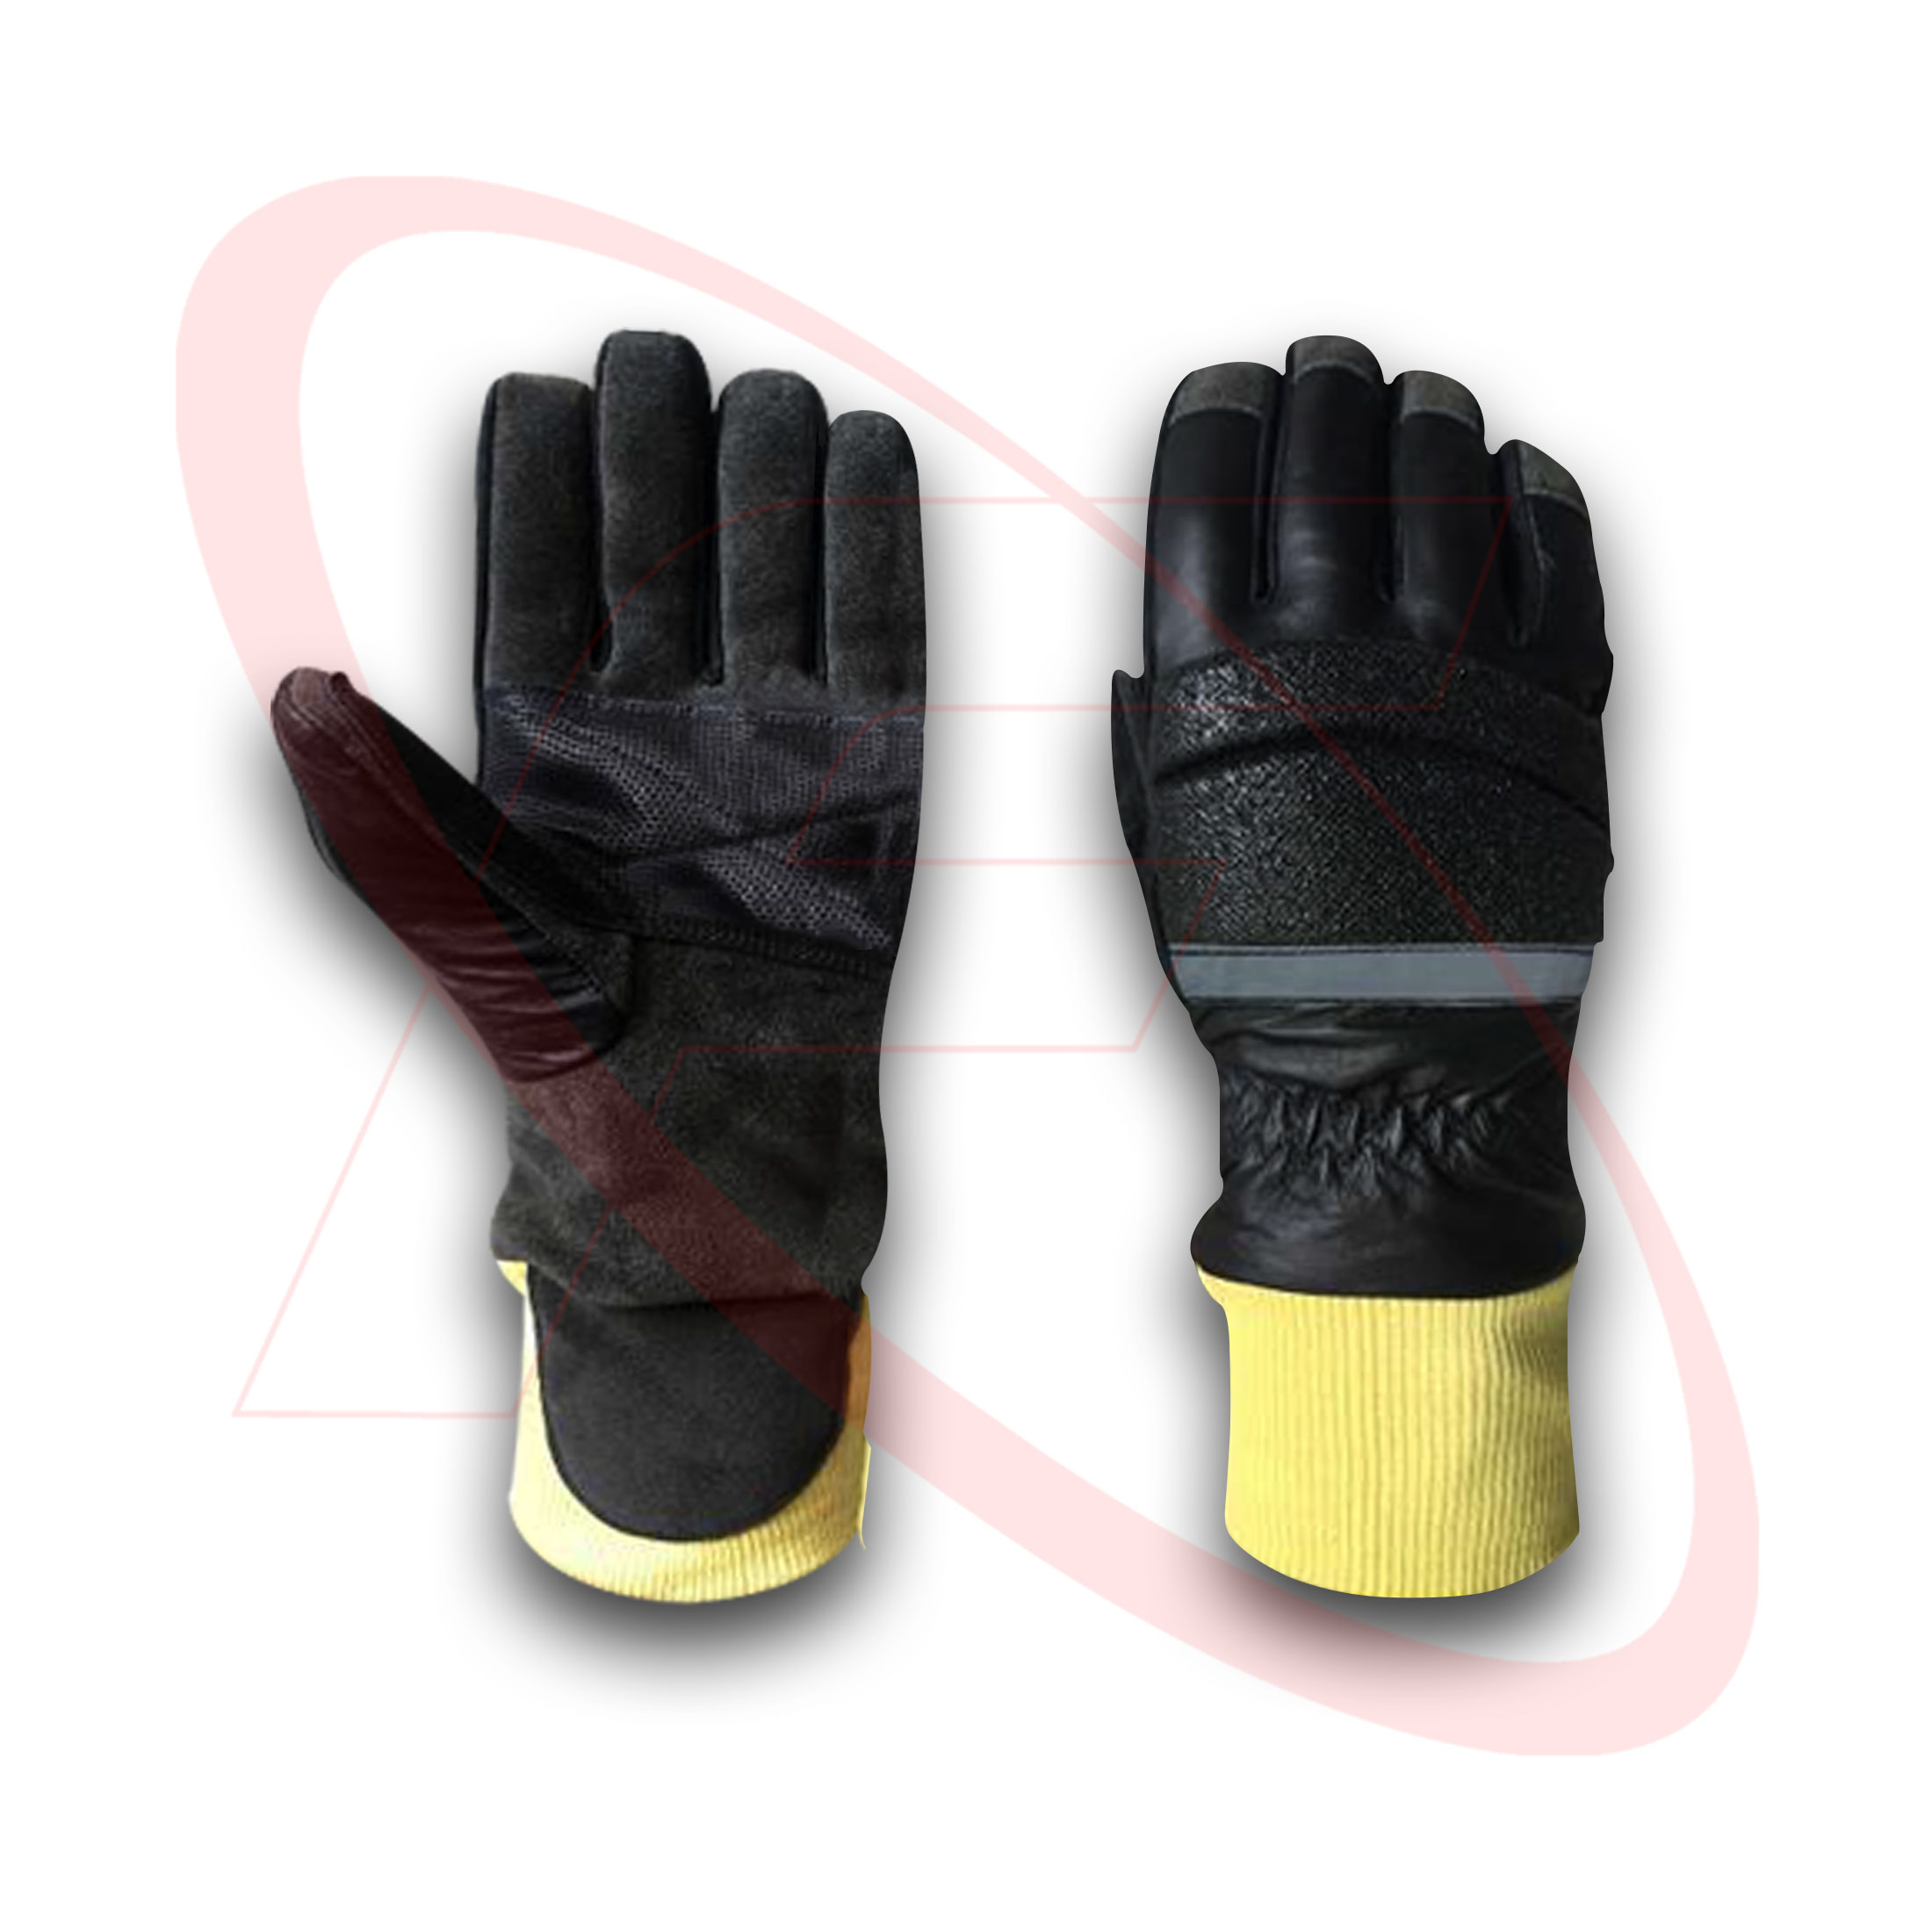 Fire Fighter Glove Cowhide Split Leather with Moisture Barer Fire Fighter Glove For Fireman